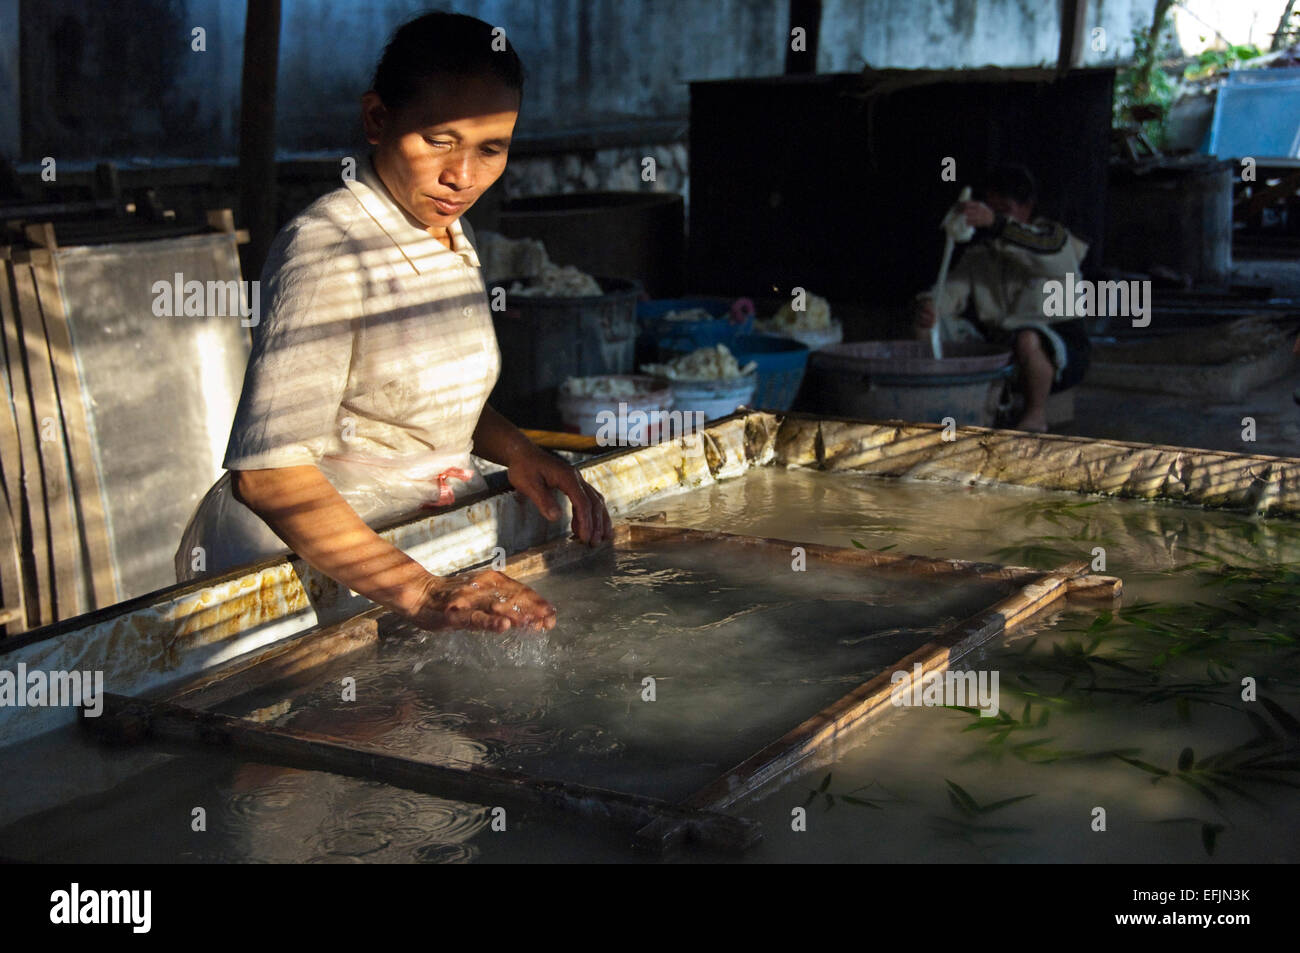 Horizontal portrait of a local Lao lady making washi, or handcrafted sa paper in Laos. Stock Photo